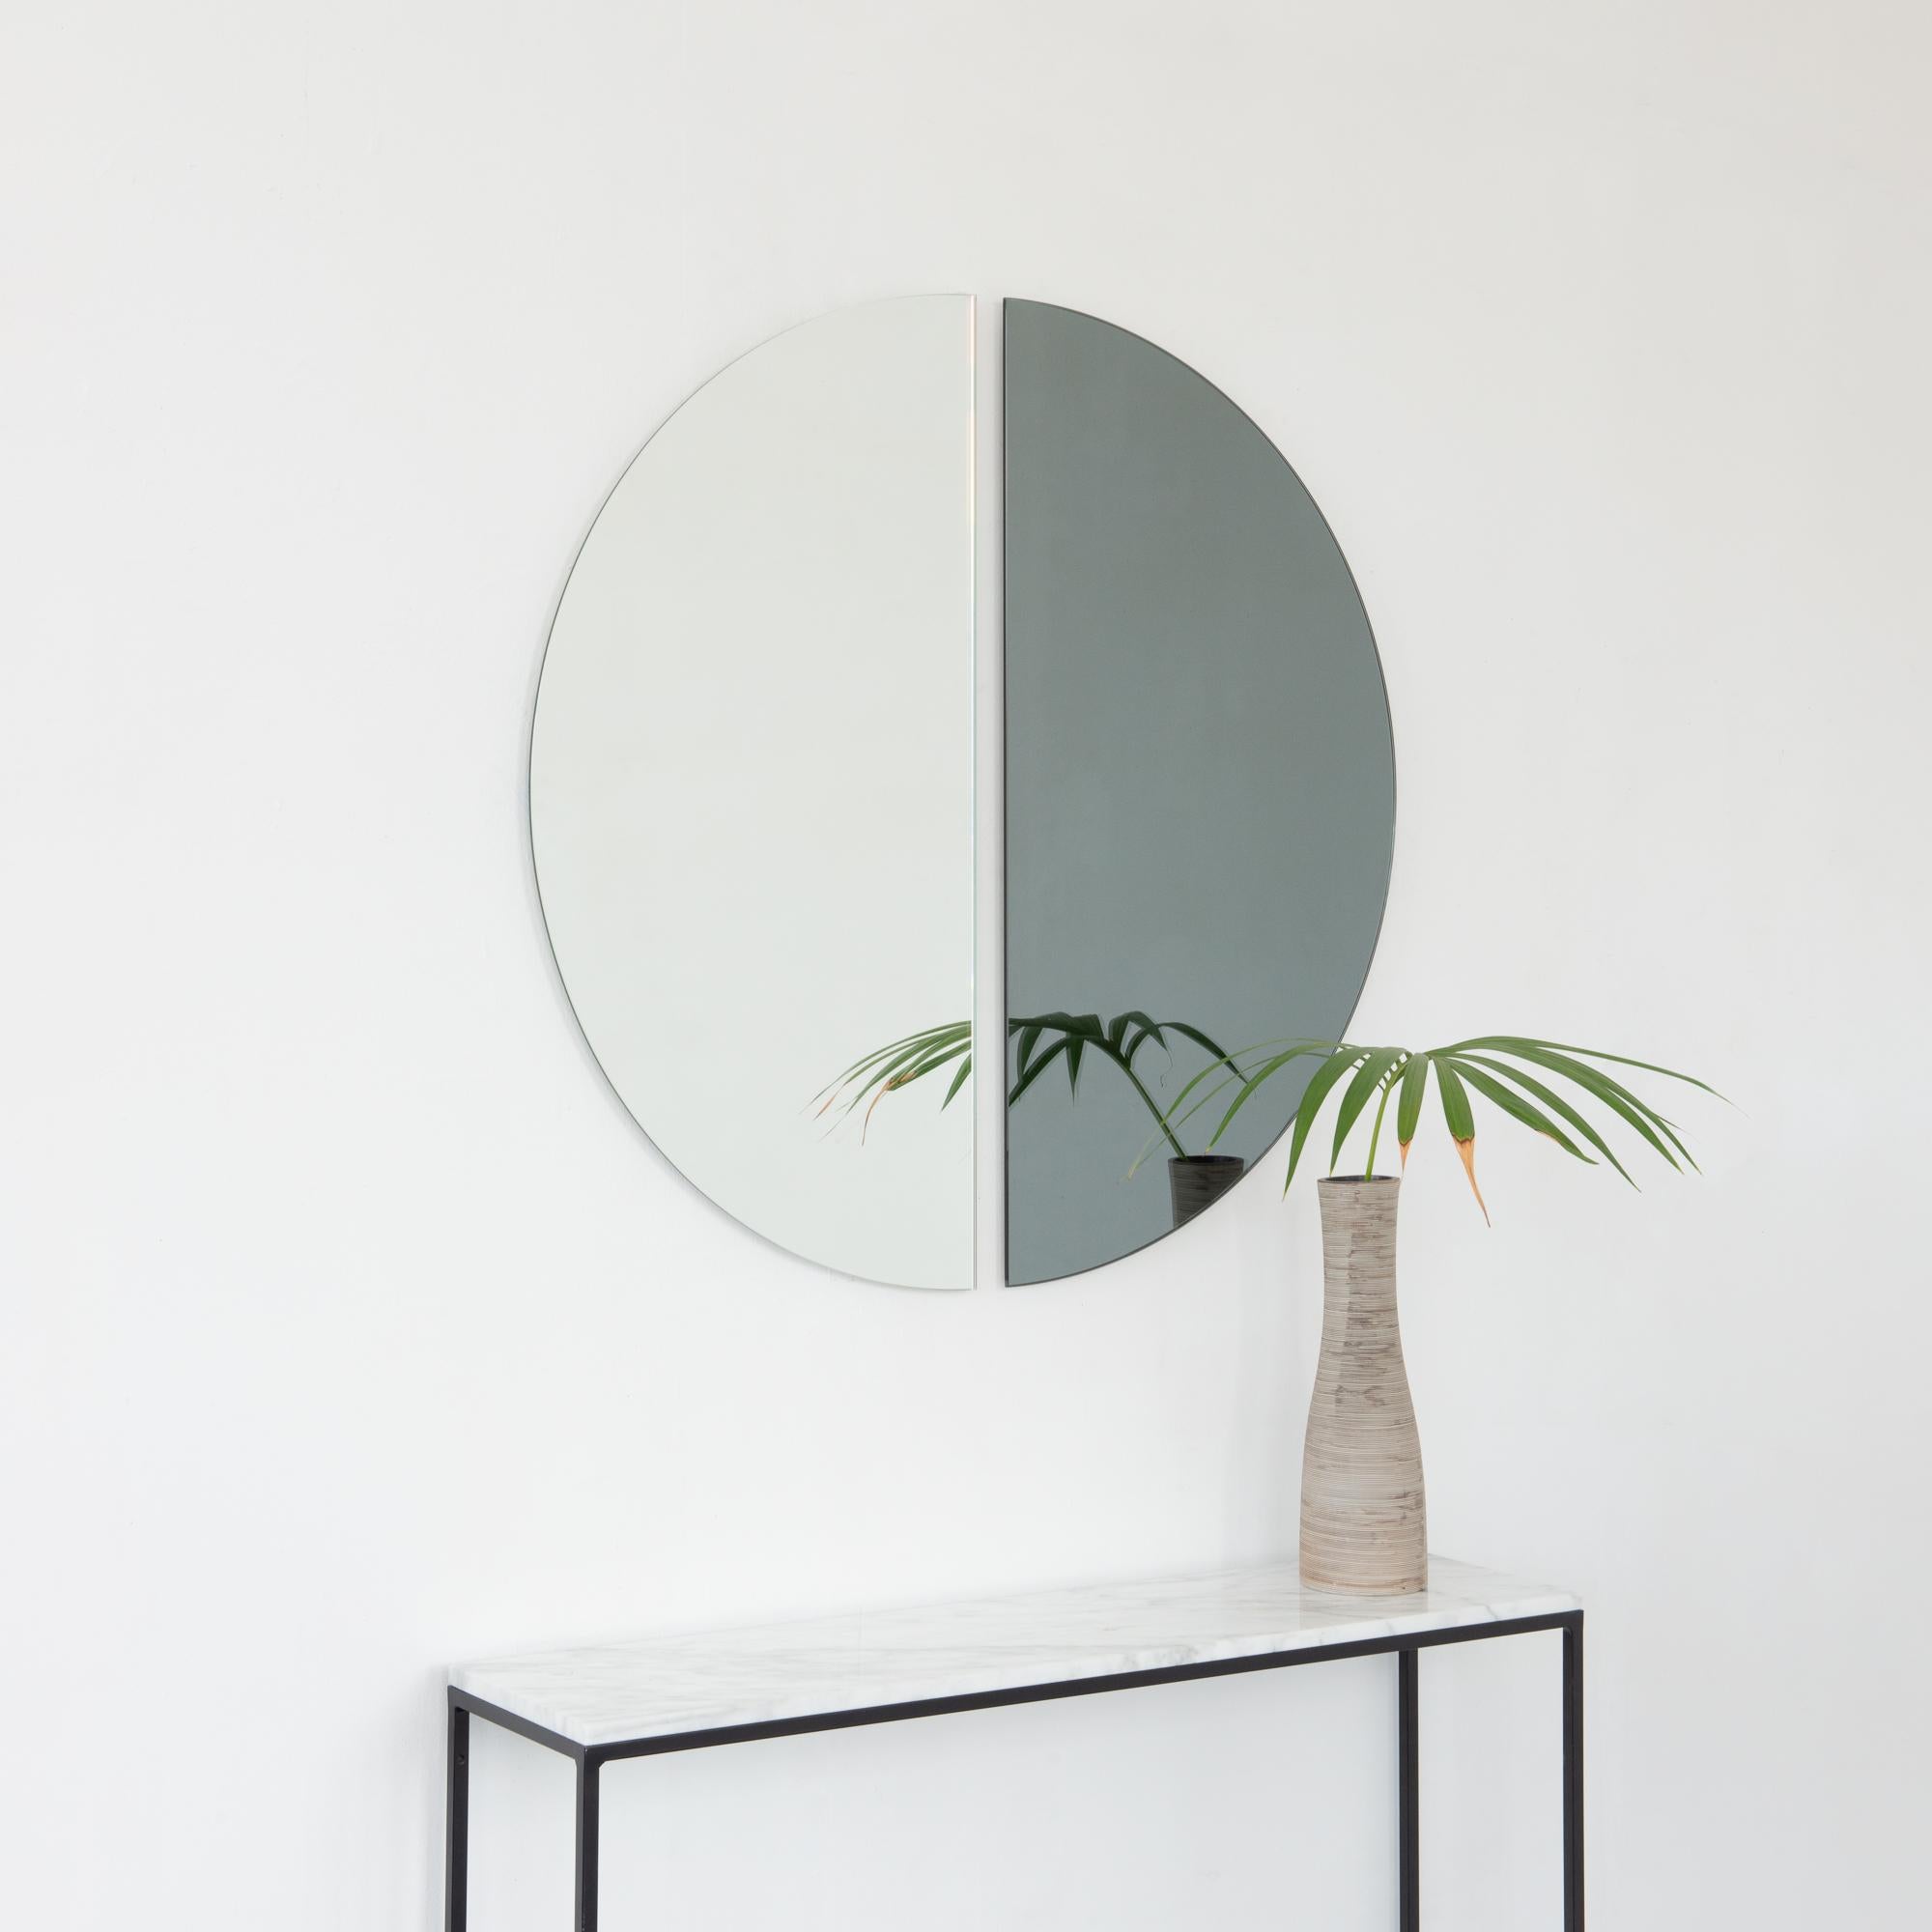 Set of two minimalist half-moon Luna™ standard silver + black tinted frameless mirrors with a floating effect. Fitted with a quality hanging system for a flexible installation in 4 different directions. Designed and made in London, UK. 

Our mirrors